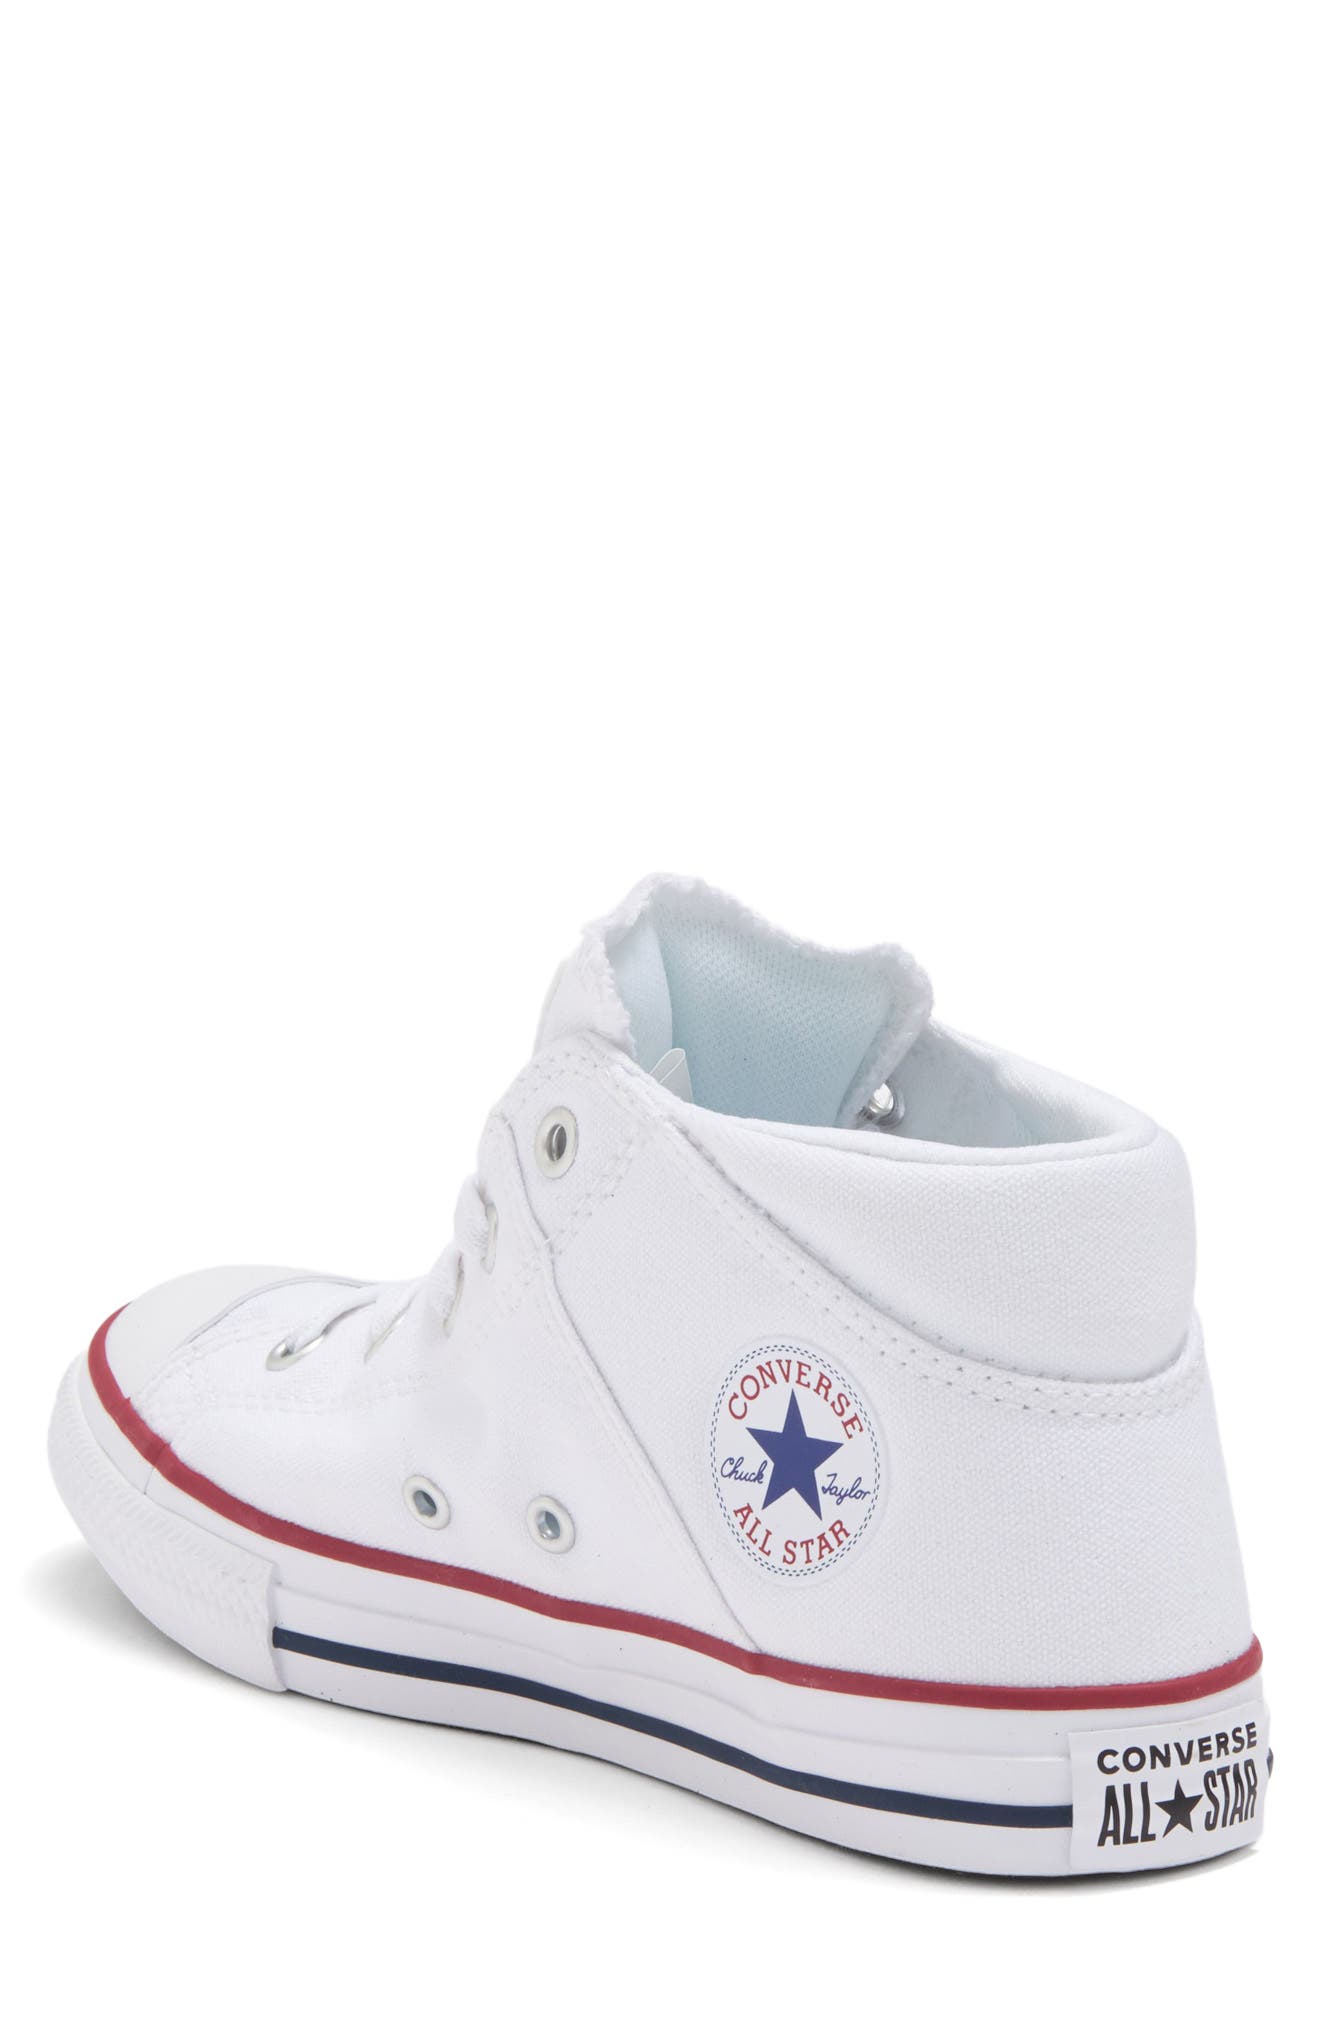 converse chuck taylor all star mid top